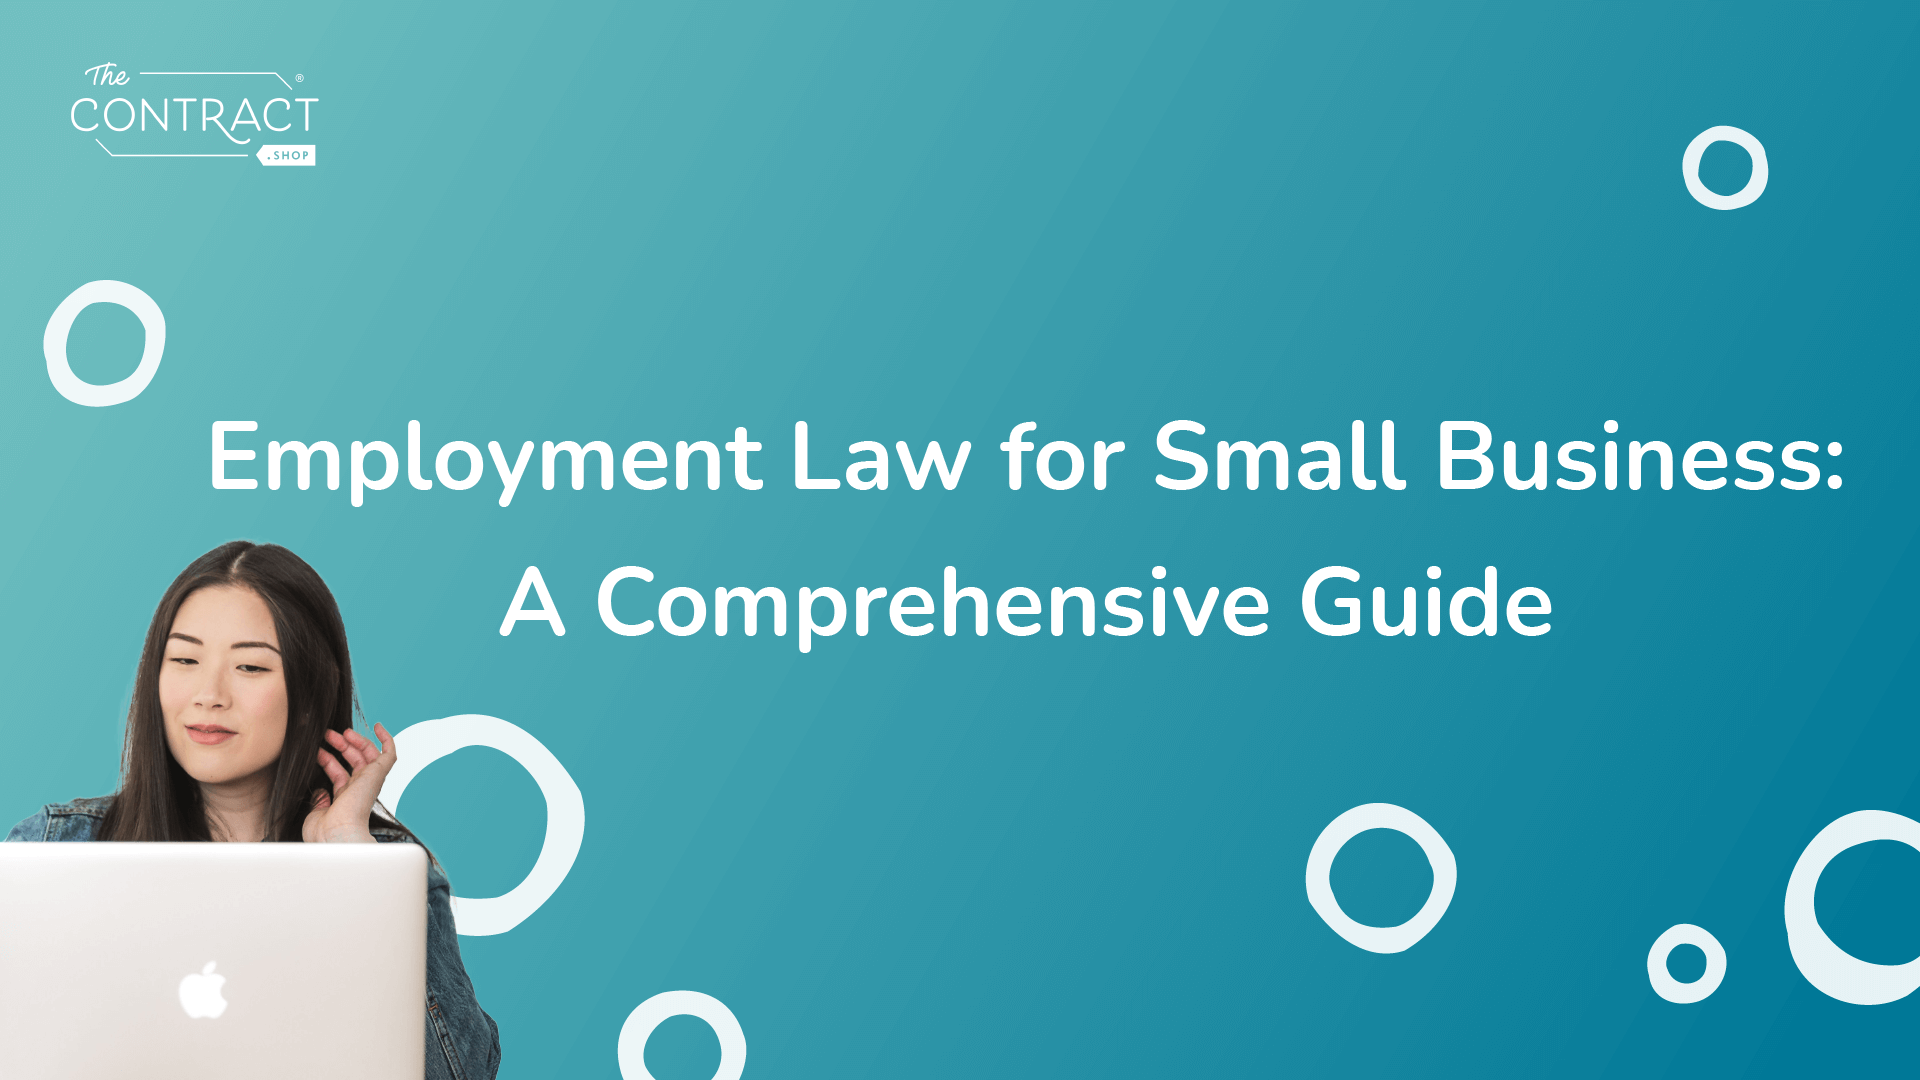 Employment Law for Small Business: A Comprehensive Guide